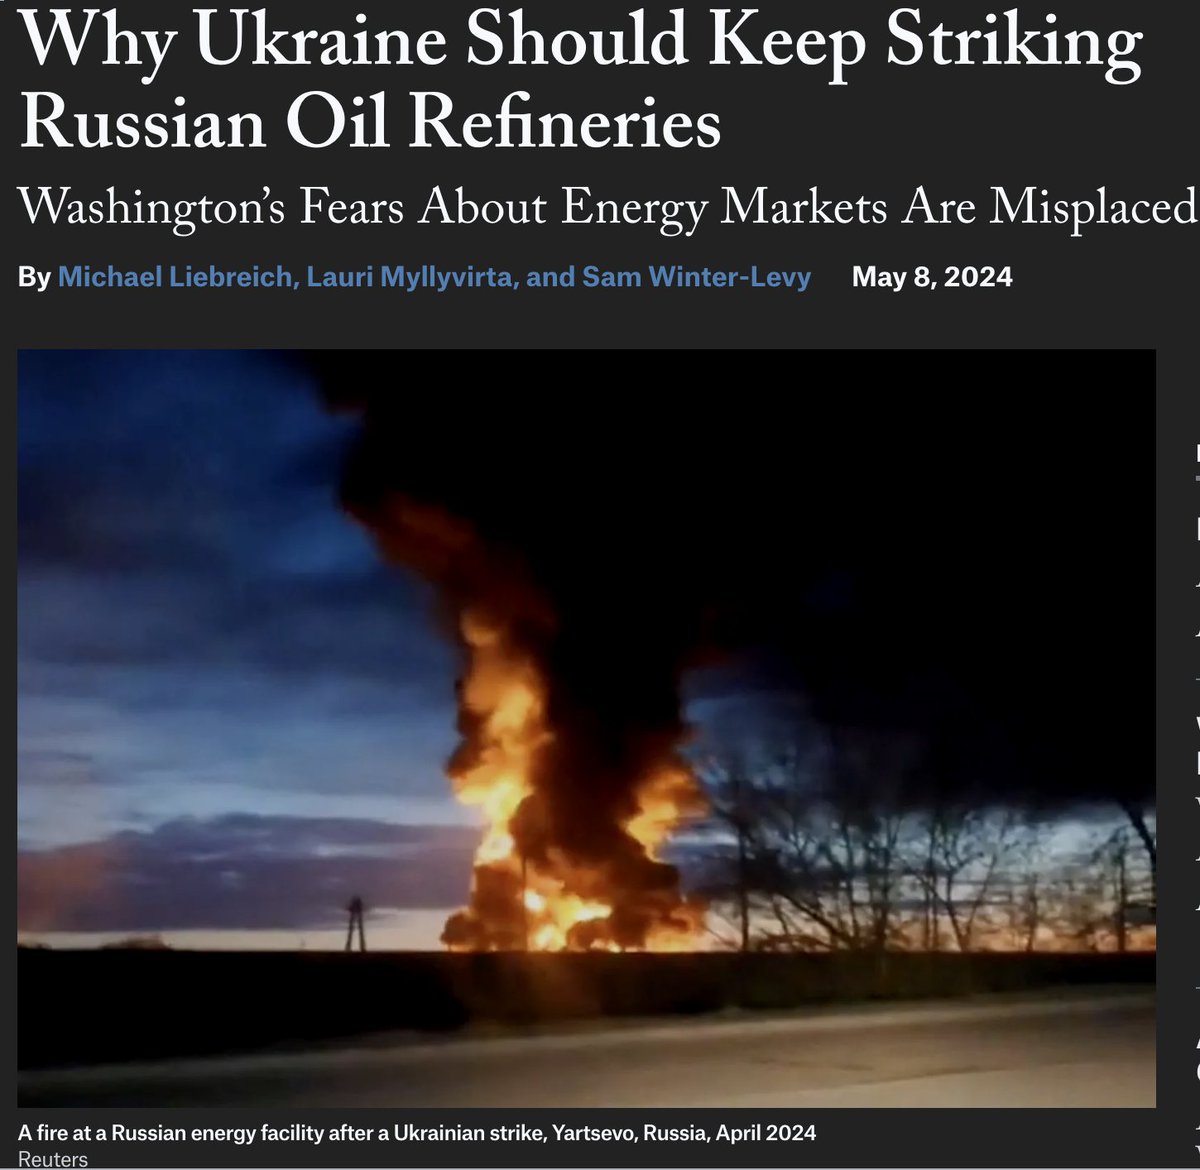 Just like I predicted and assessed the Ukrainian air campaign against Russia's oil refining industry as being extremely effective, the magazine 'Foreign Affairs' confirms my assessment. Hitting Russian refining infrastructure only brings benefits with little or even no risks.…